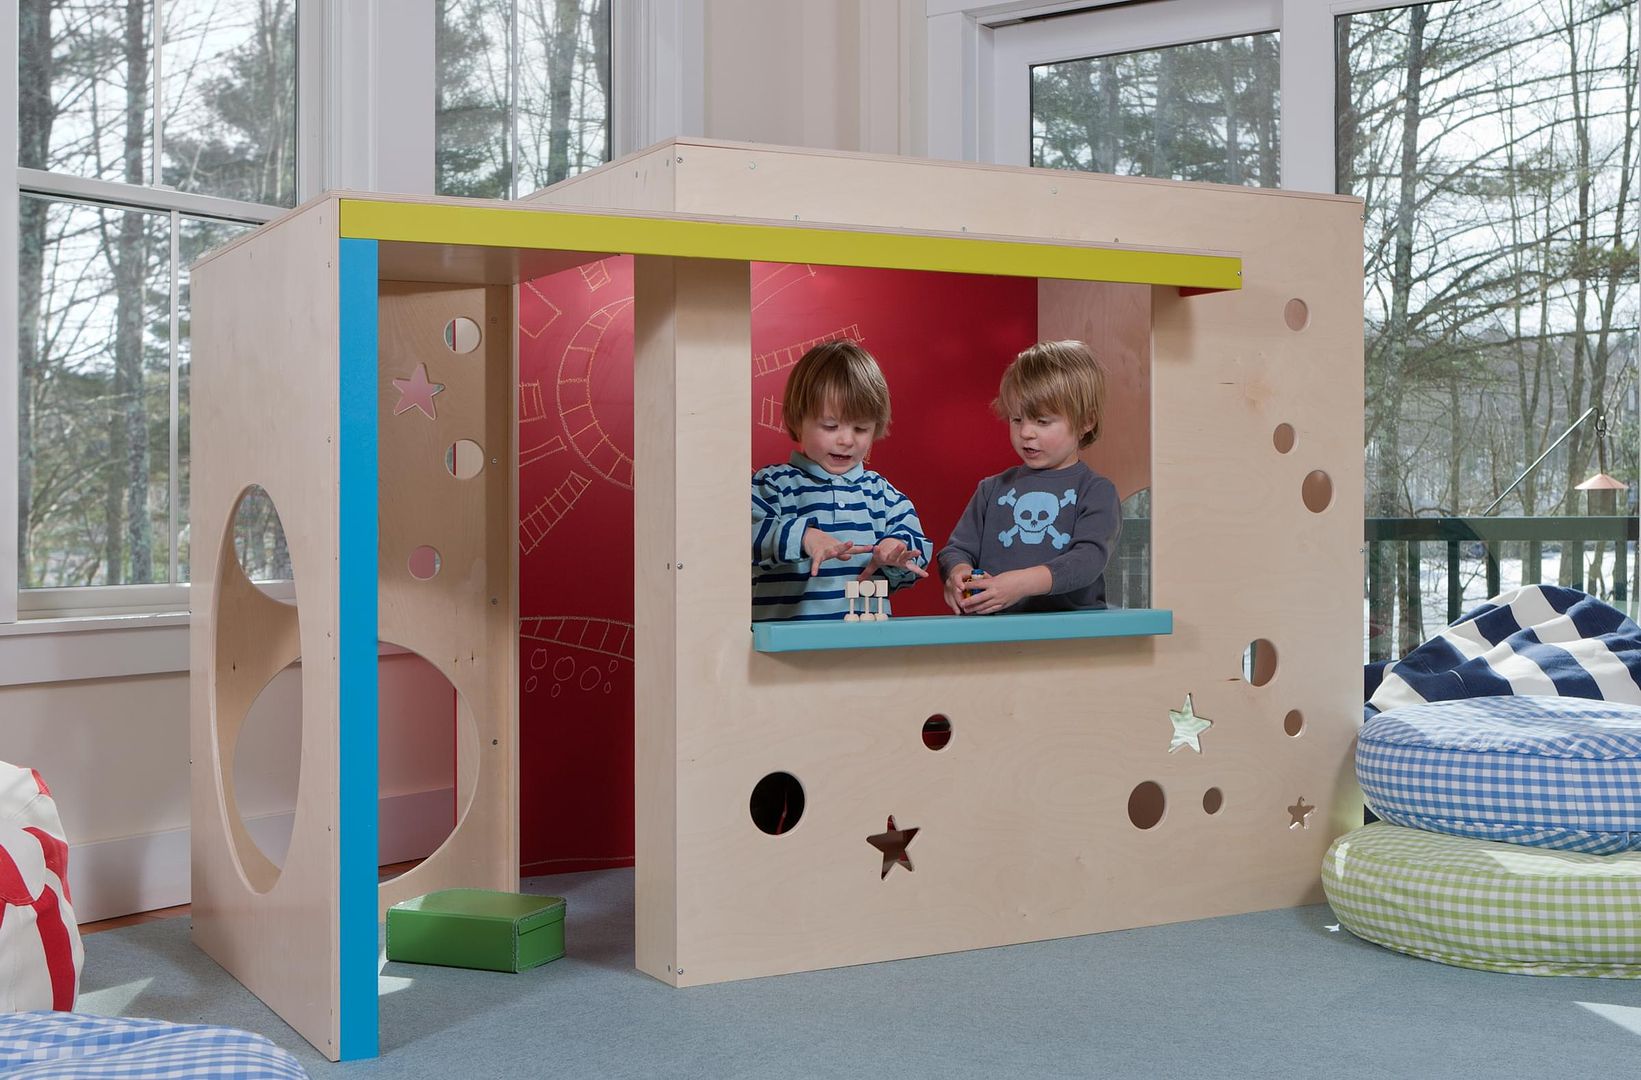 CedarWorks makes some of the coolest indoor playhouses for kids.